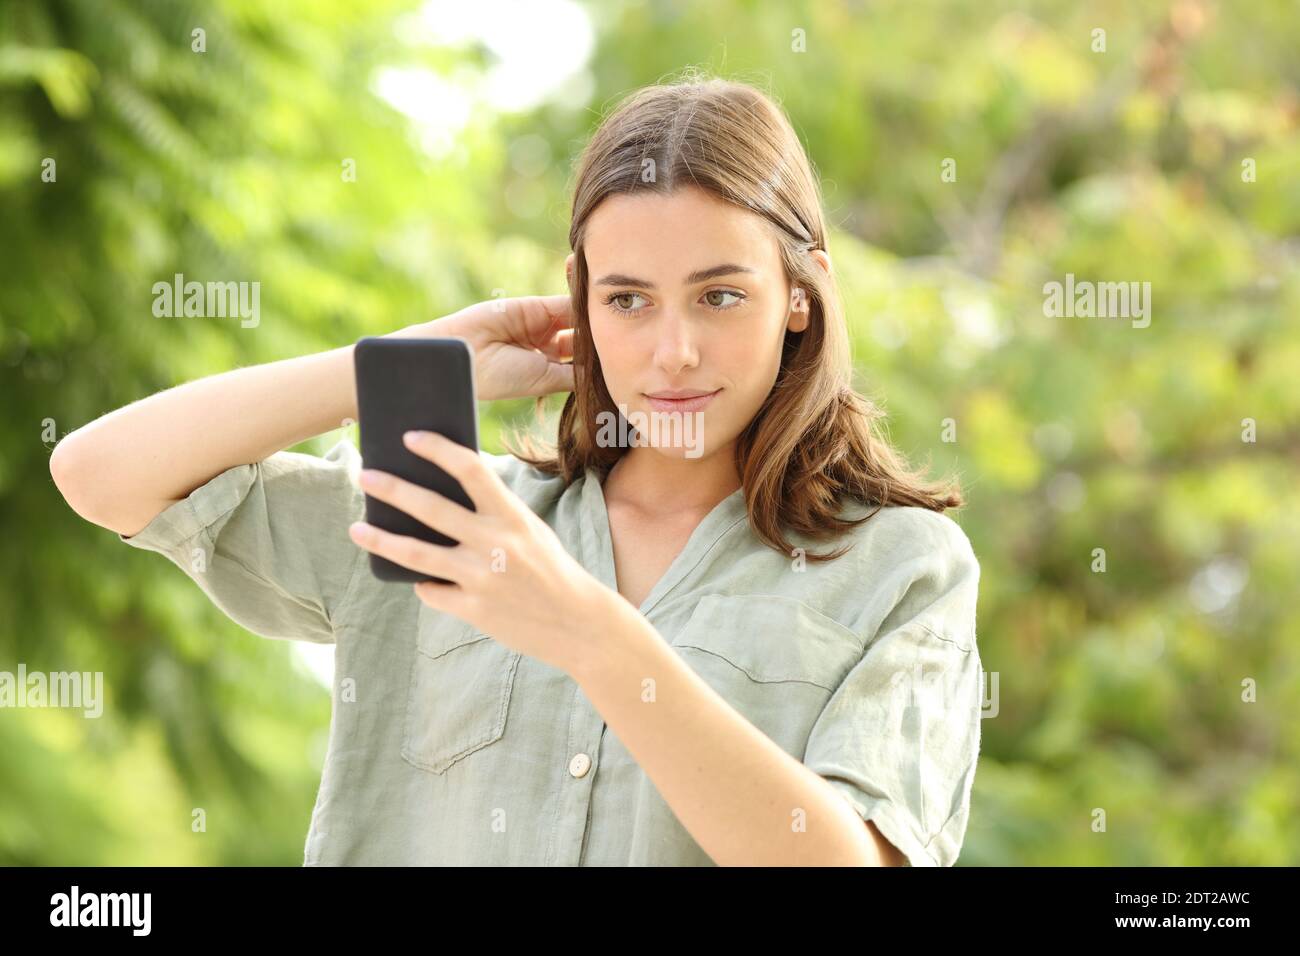 Woman combing hair using smartphone as a mirror in a park Stock Photo